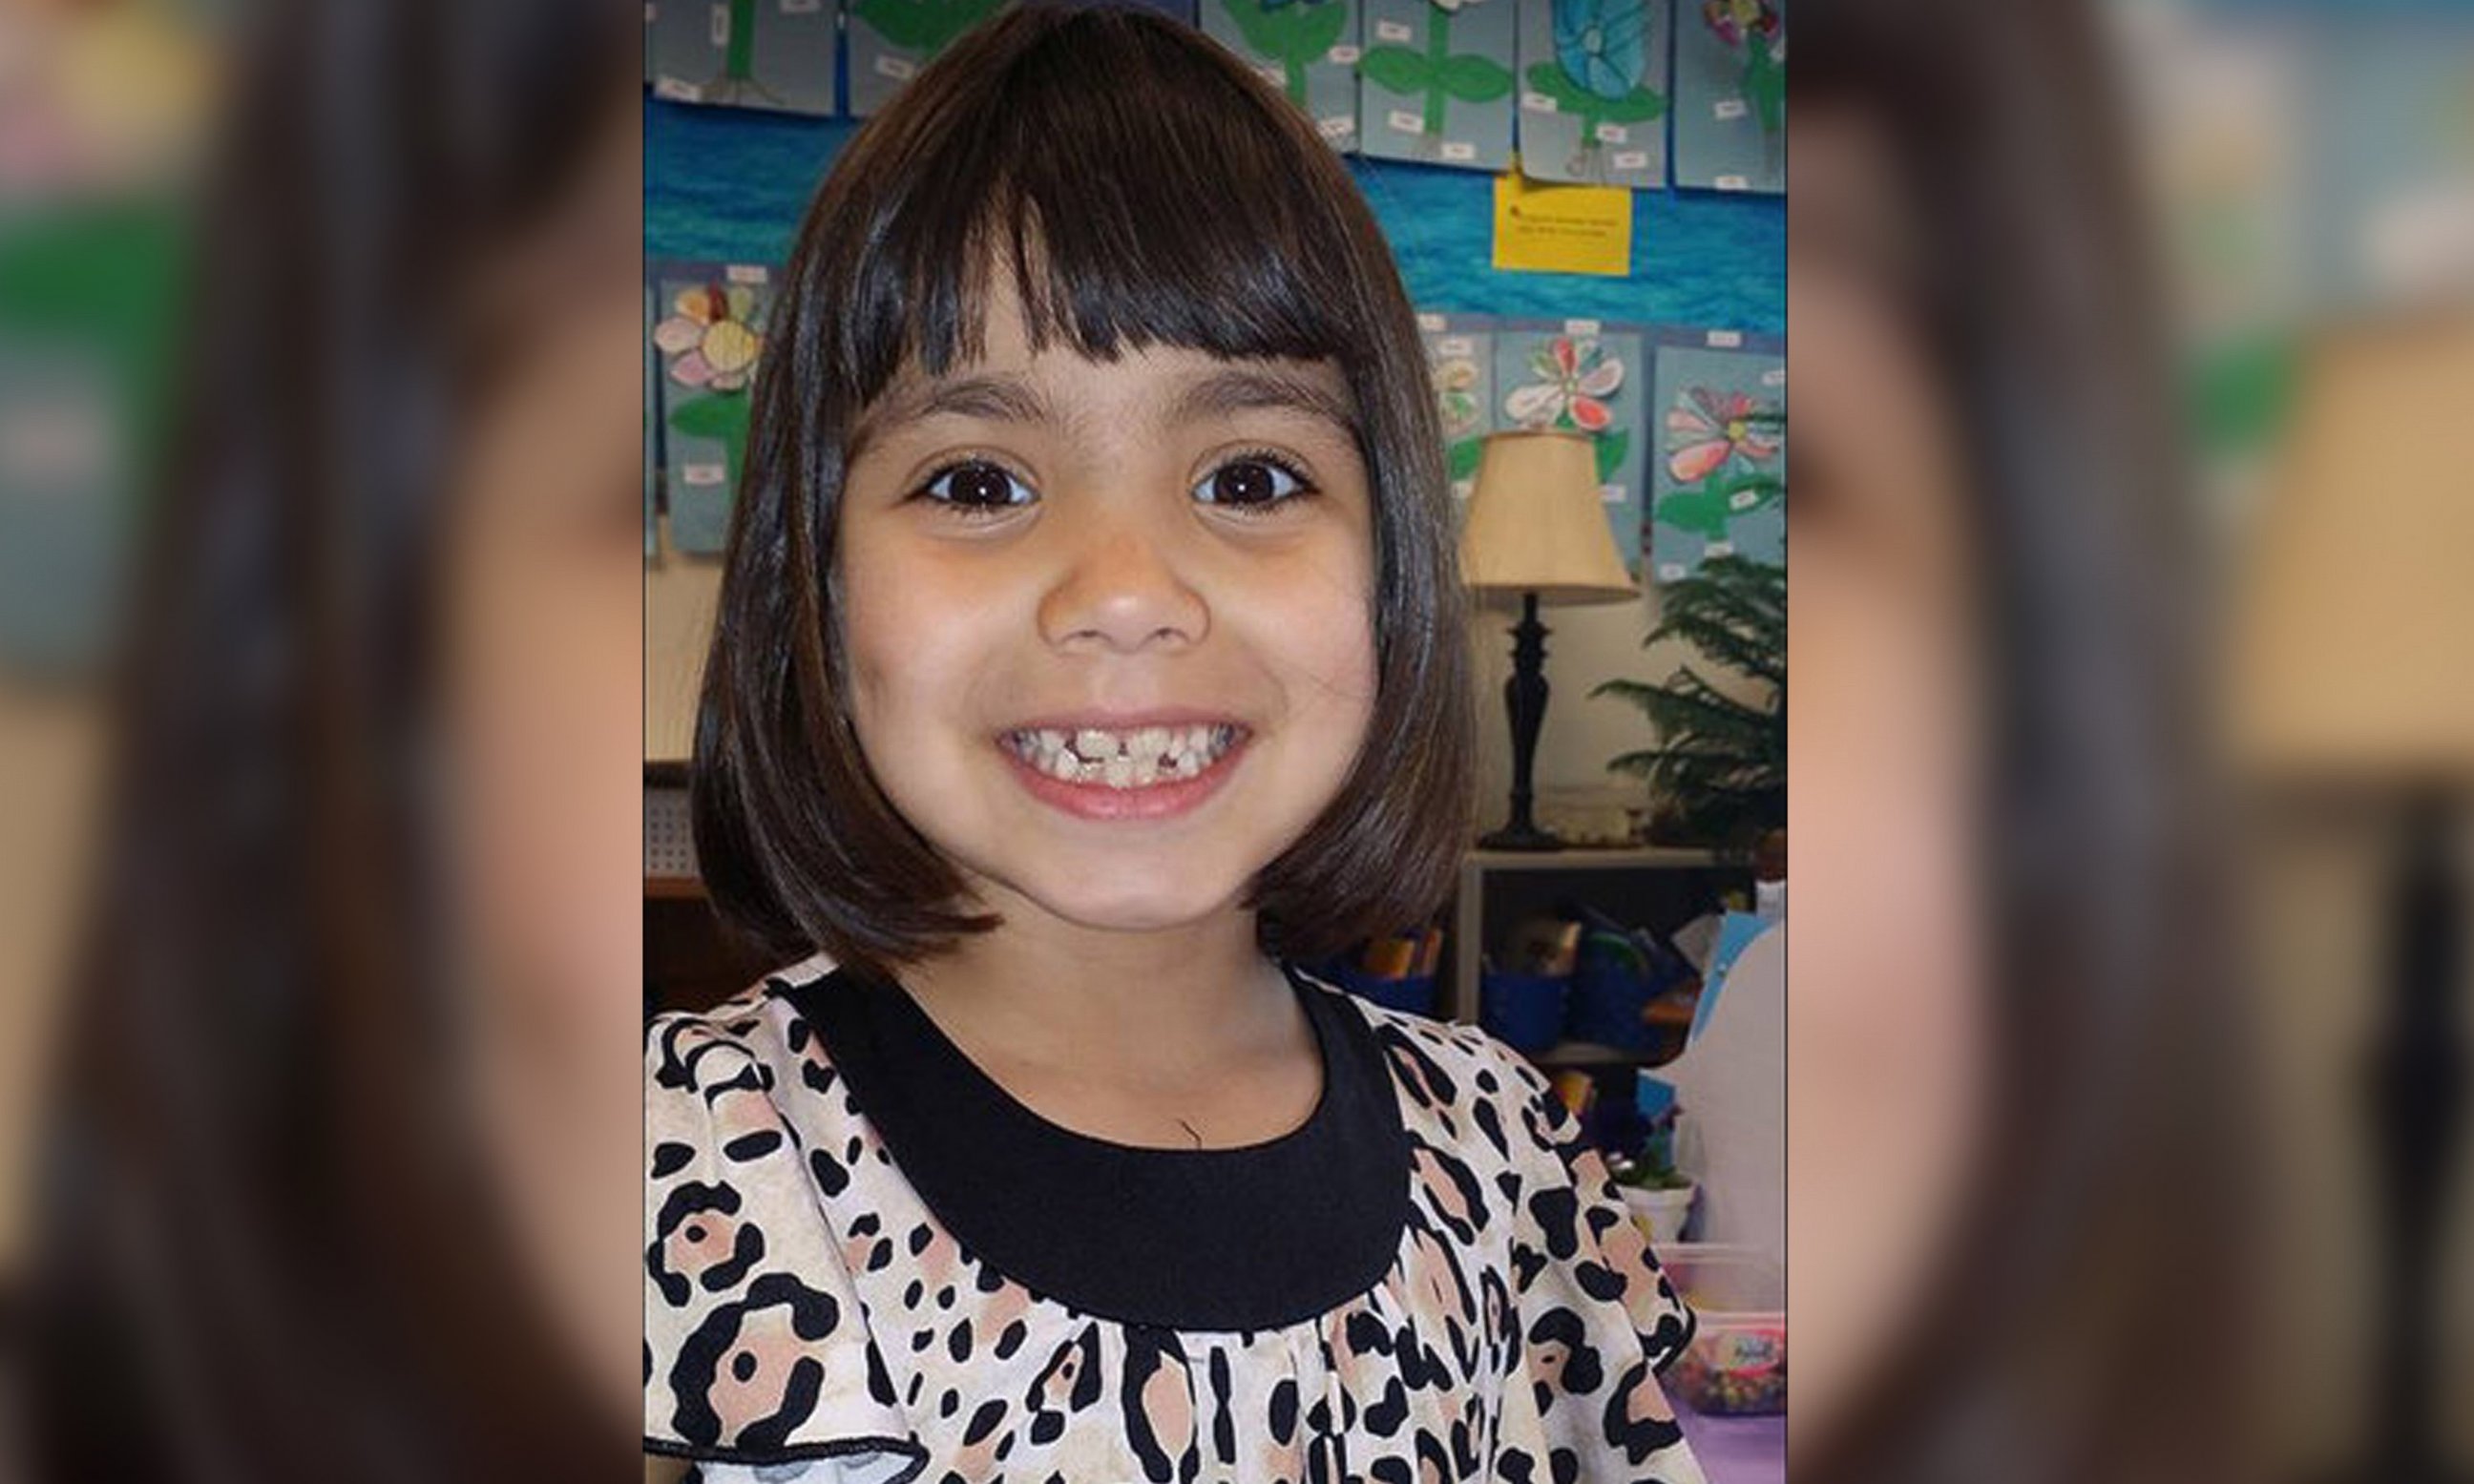 PHOTO: Six-year-old Jenise Paulette Wright of Bremerton, Wash. was last seen in her home on the evening of August 2, 2014.